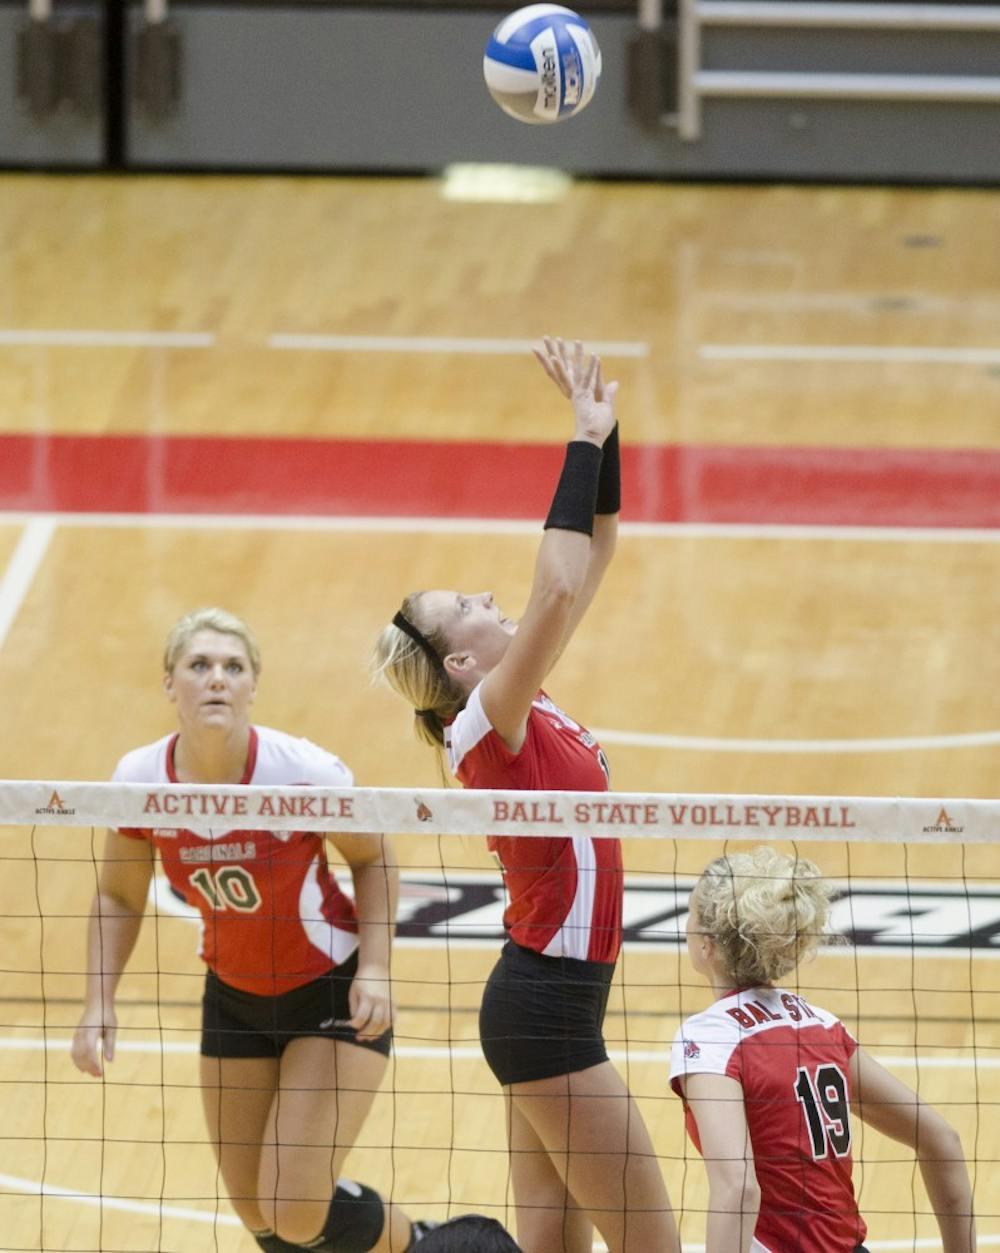 Junior setter Jenna Spadafora sets the ball in the second set of the scrimmage against Purdue University on March 29 at Worthen Arena. DN PHOTO BREANNA DAUGHERTY 